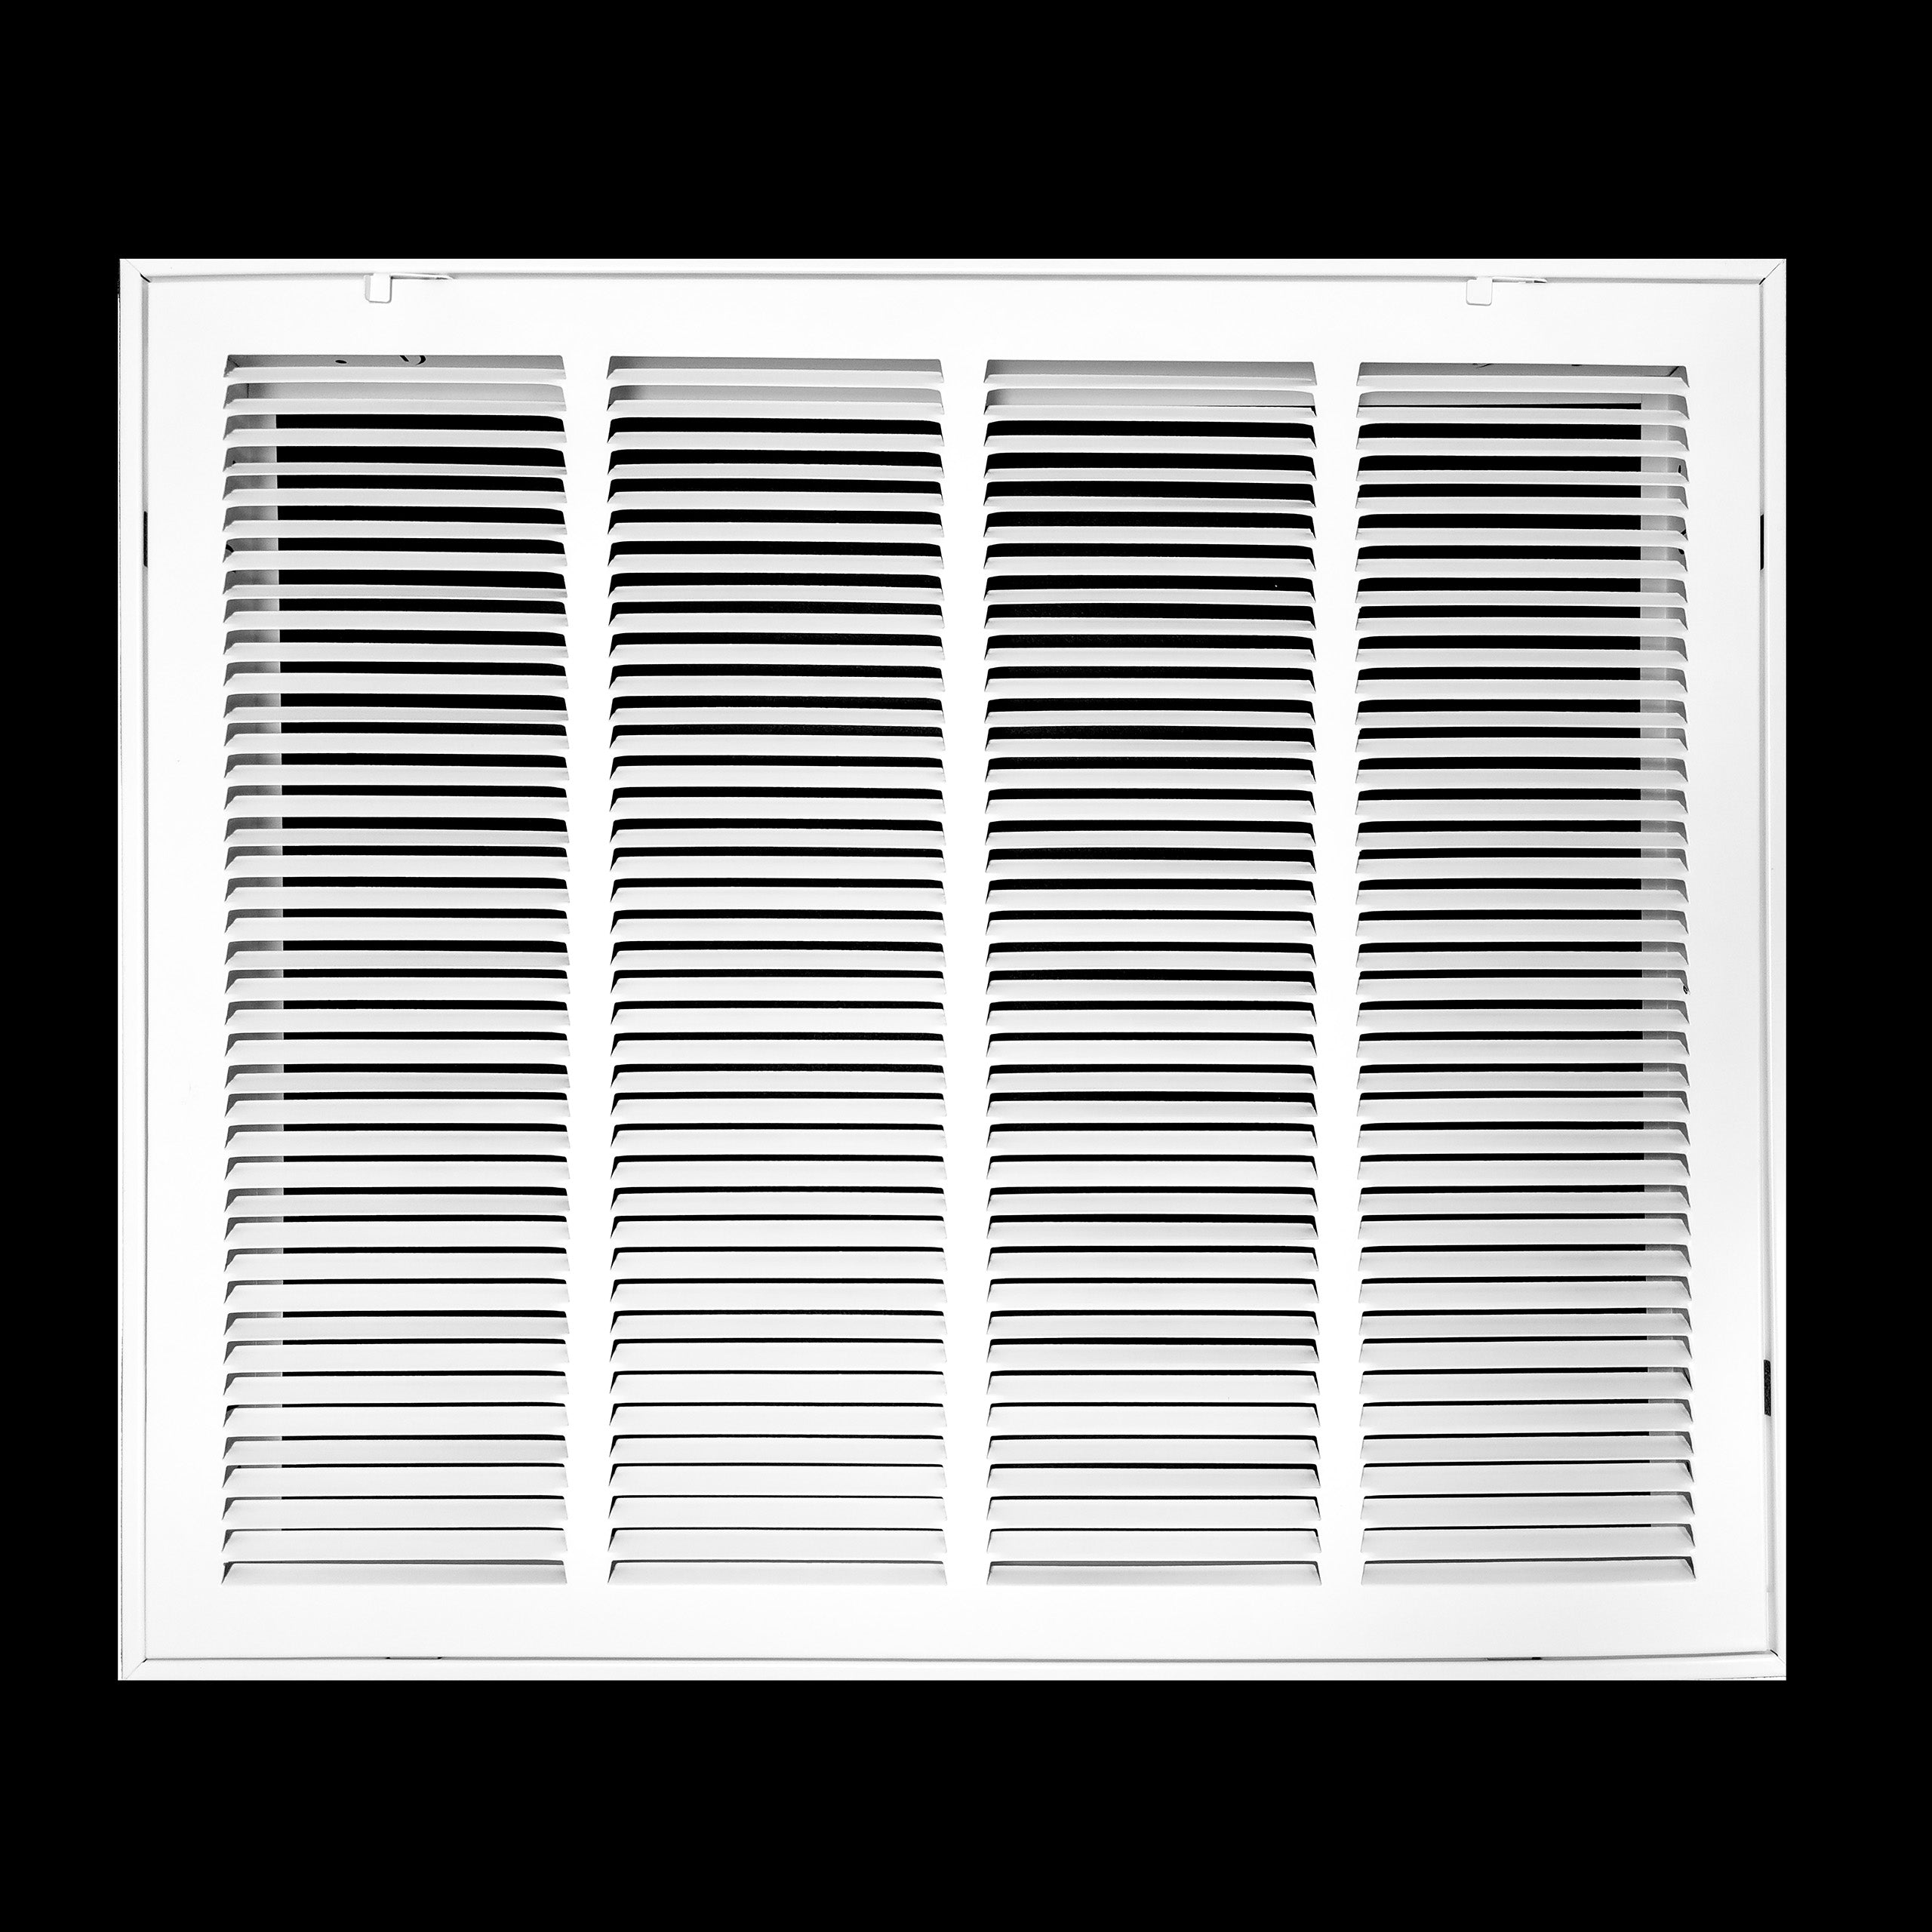 airgrilles 24" x 20" duct opening   hd steel return air filter grille for sidewall and ceiling 7hnd-rfg1-wh-24x20 038775638296 - 1